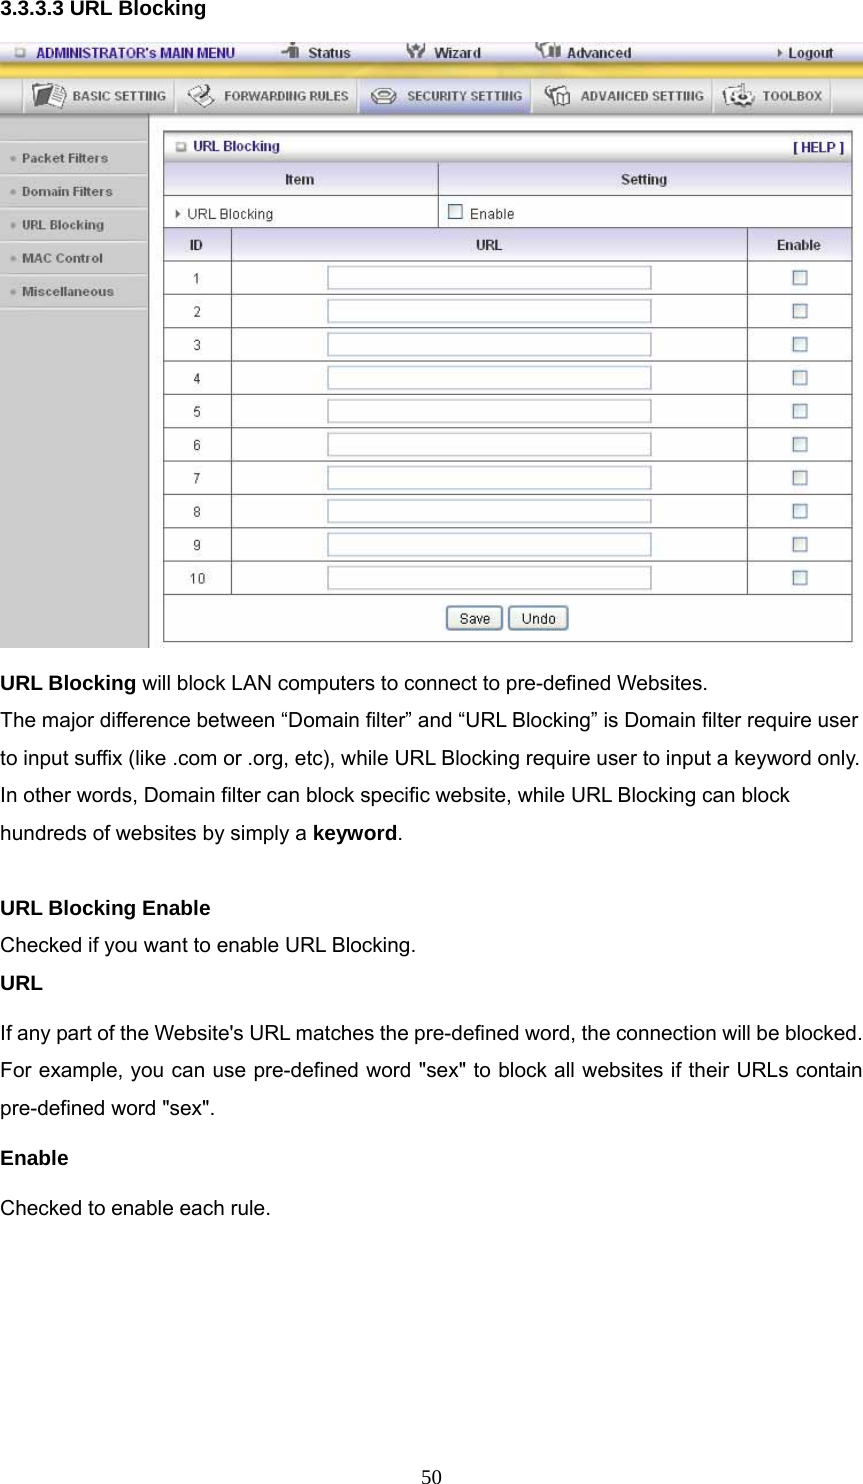  503.3.3.3 URL Blocking  URL Blocking will block LAN computers to connect to pre-defined Websites. The major difference between “Domain filter” and “URL Blocking” is Domain filter require user to input suffix (like .com or .org, etc), while URL Blocking require user to input a keyword only. In other words, Domain filter can block specific website, while URL Blocking can block hundreds of websites by simply a keyword.  URL Blocking Enable Checked if you want to enable URL Blocking.   URL If any part of the Website&apos;s URL matches the pre-defined word, the connection will be blocked. For example, you can use pre-defined word &quot;sex&quot; to block all websites if their URLs contain pre-defined word &quot;sex&quot;.   Enable Checked to enable each rule. 